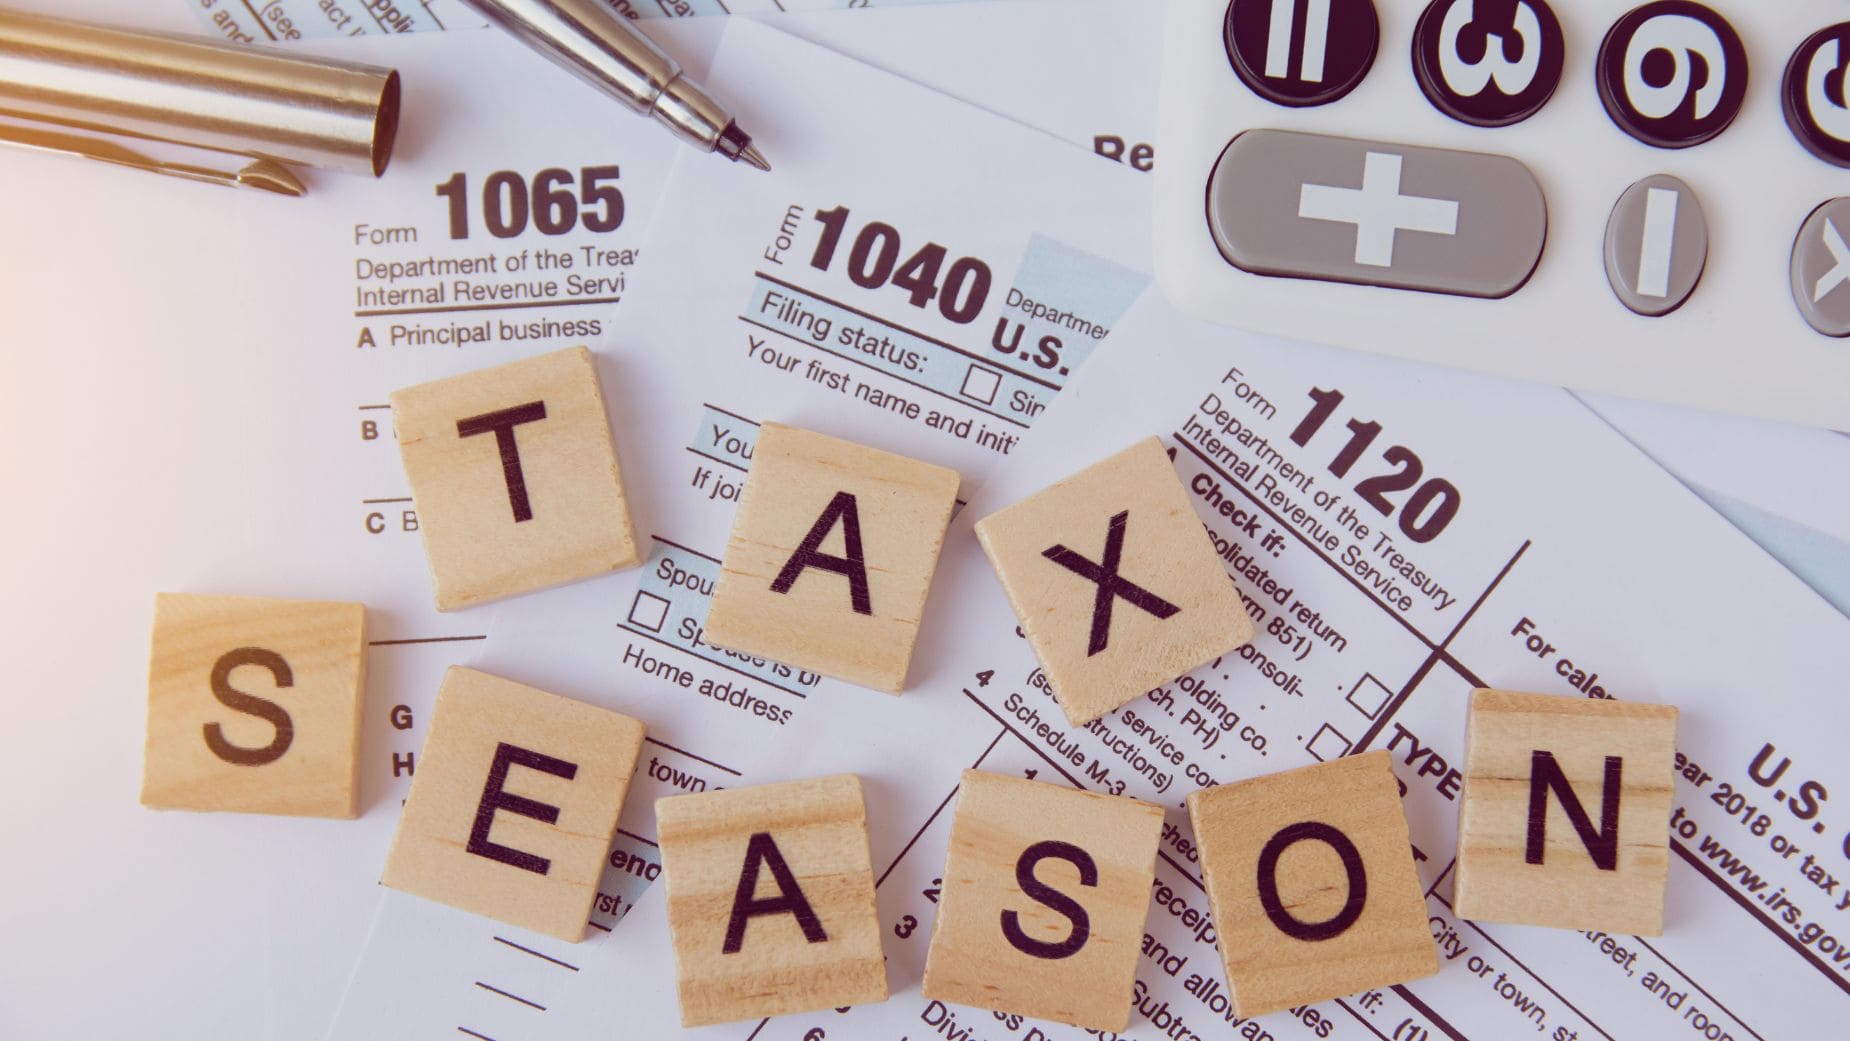 Pay attention to what to do before the IRS opens the Tax Season